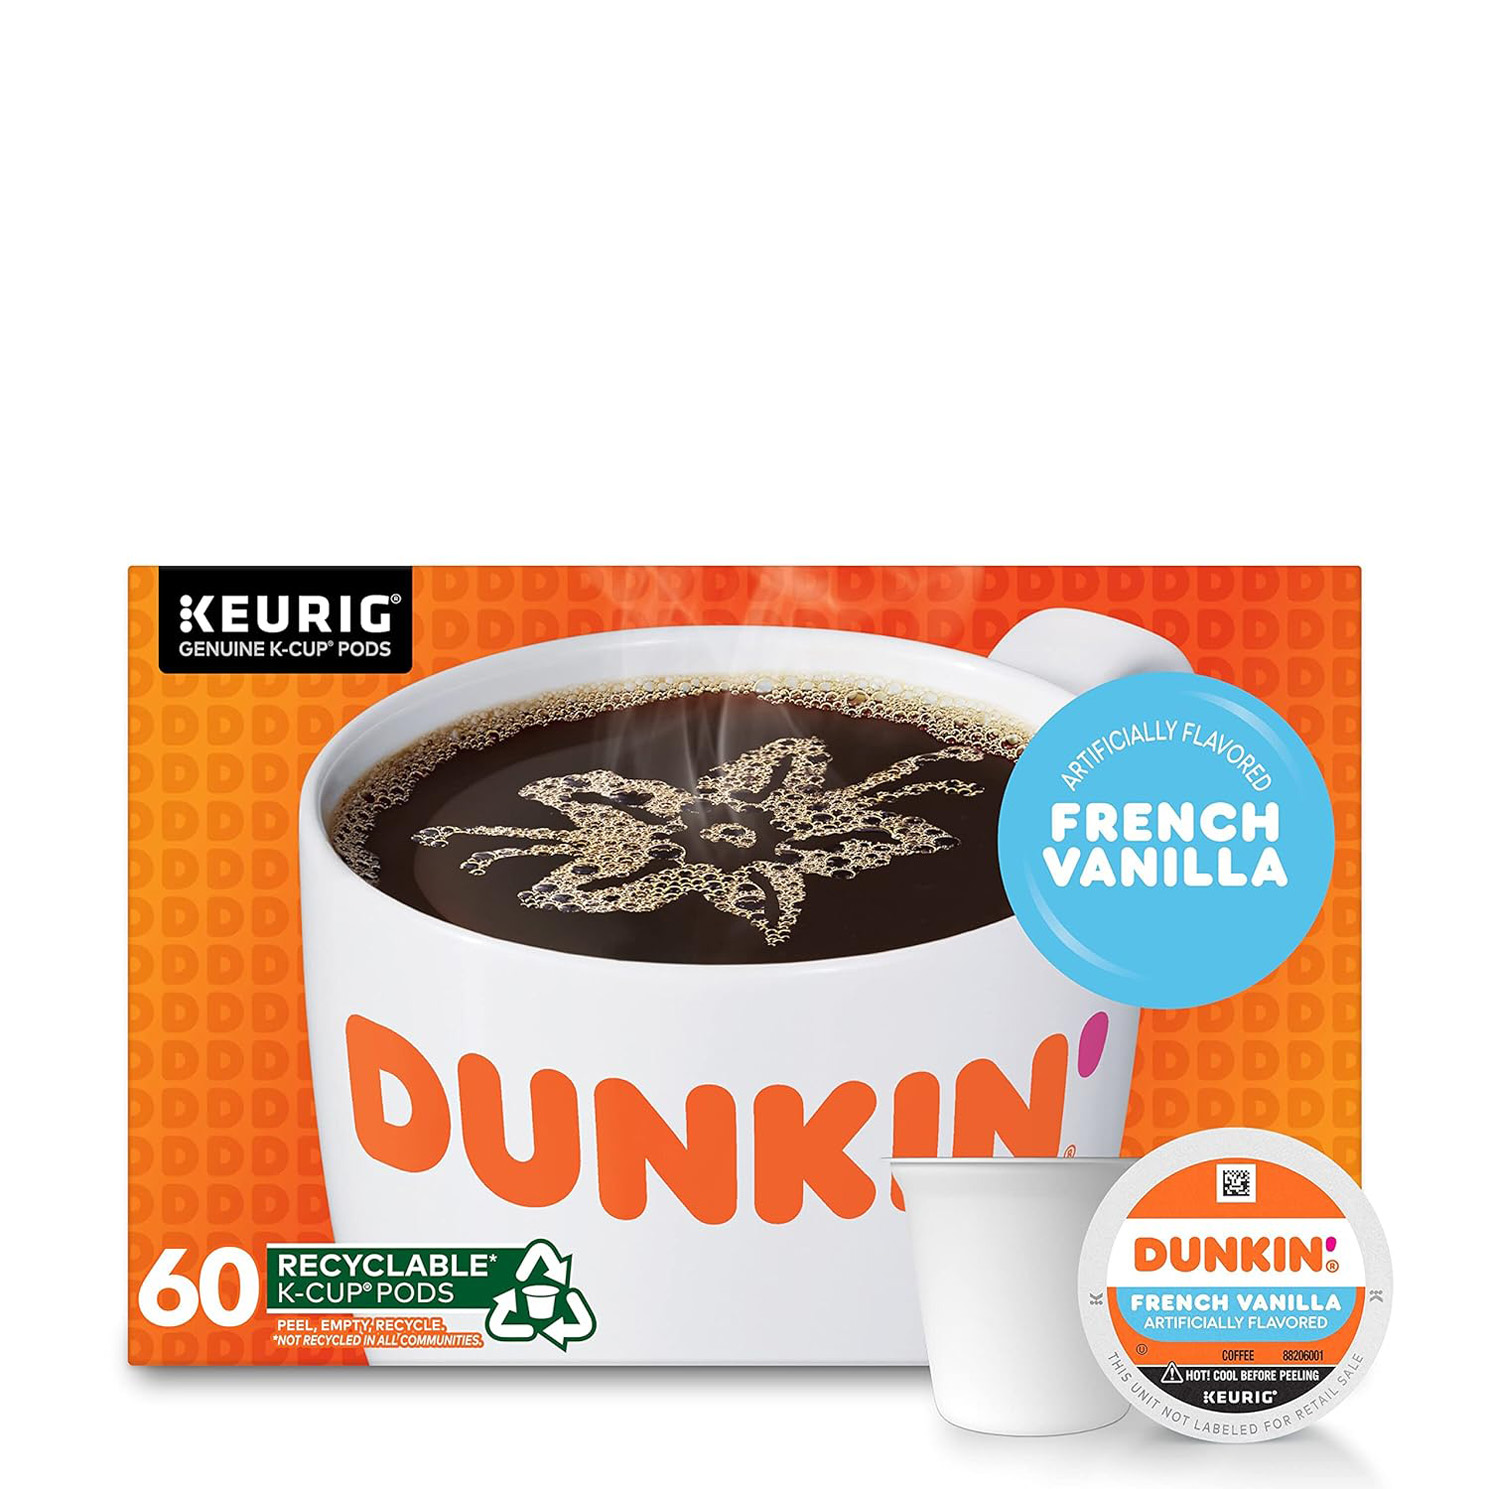 Dunkin’ French Vanilla Flavored Coffee, 60 Keurig K-Cup Pods